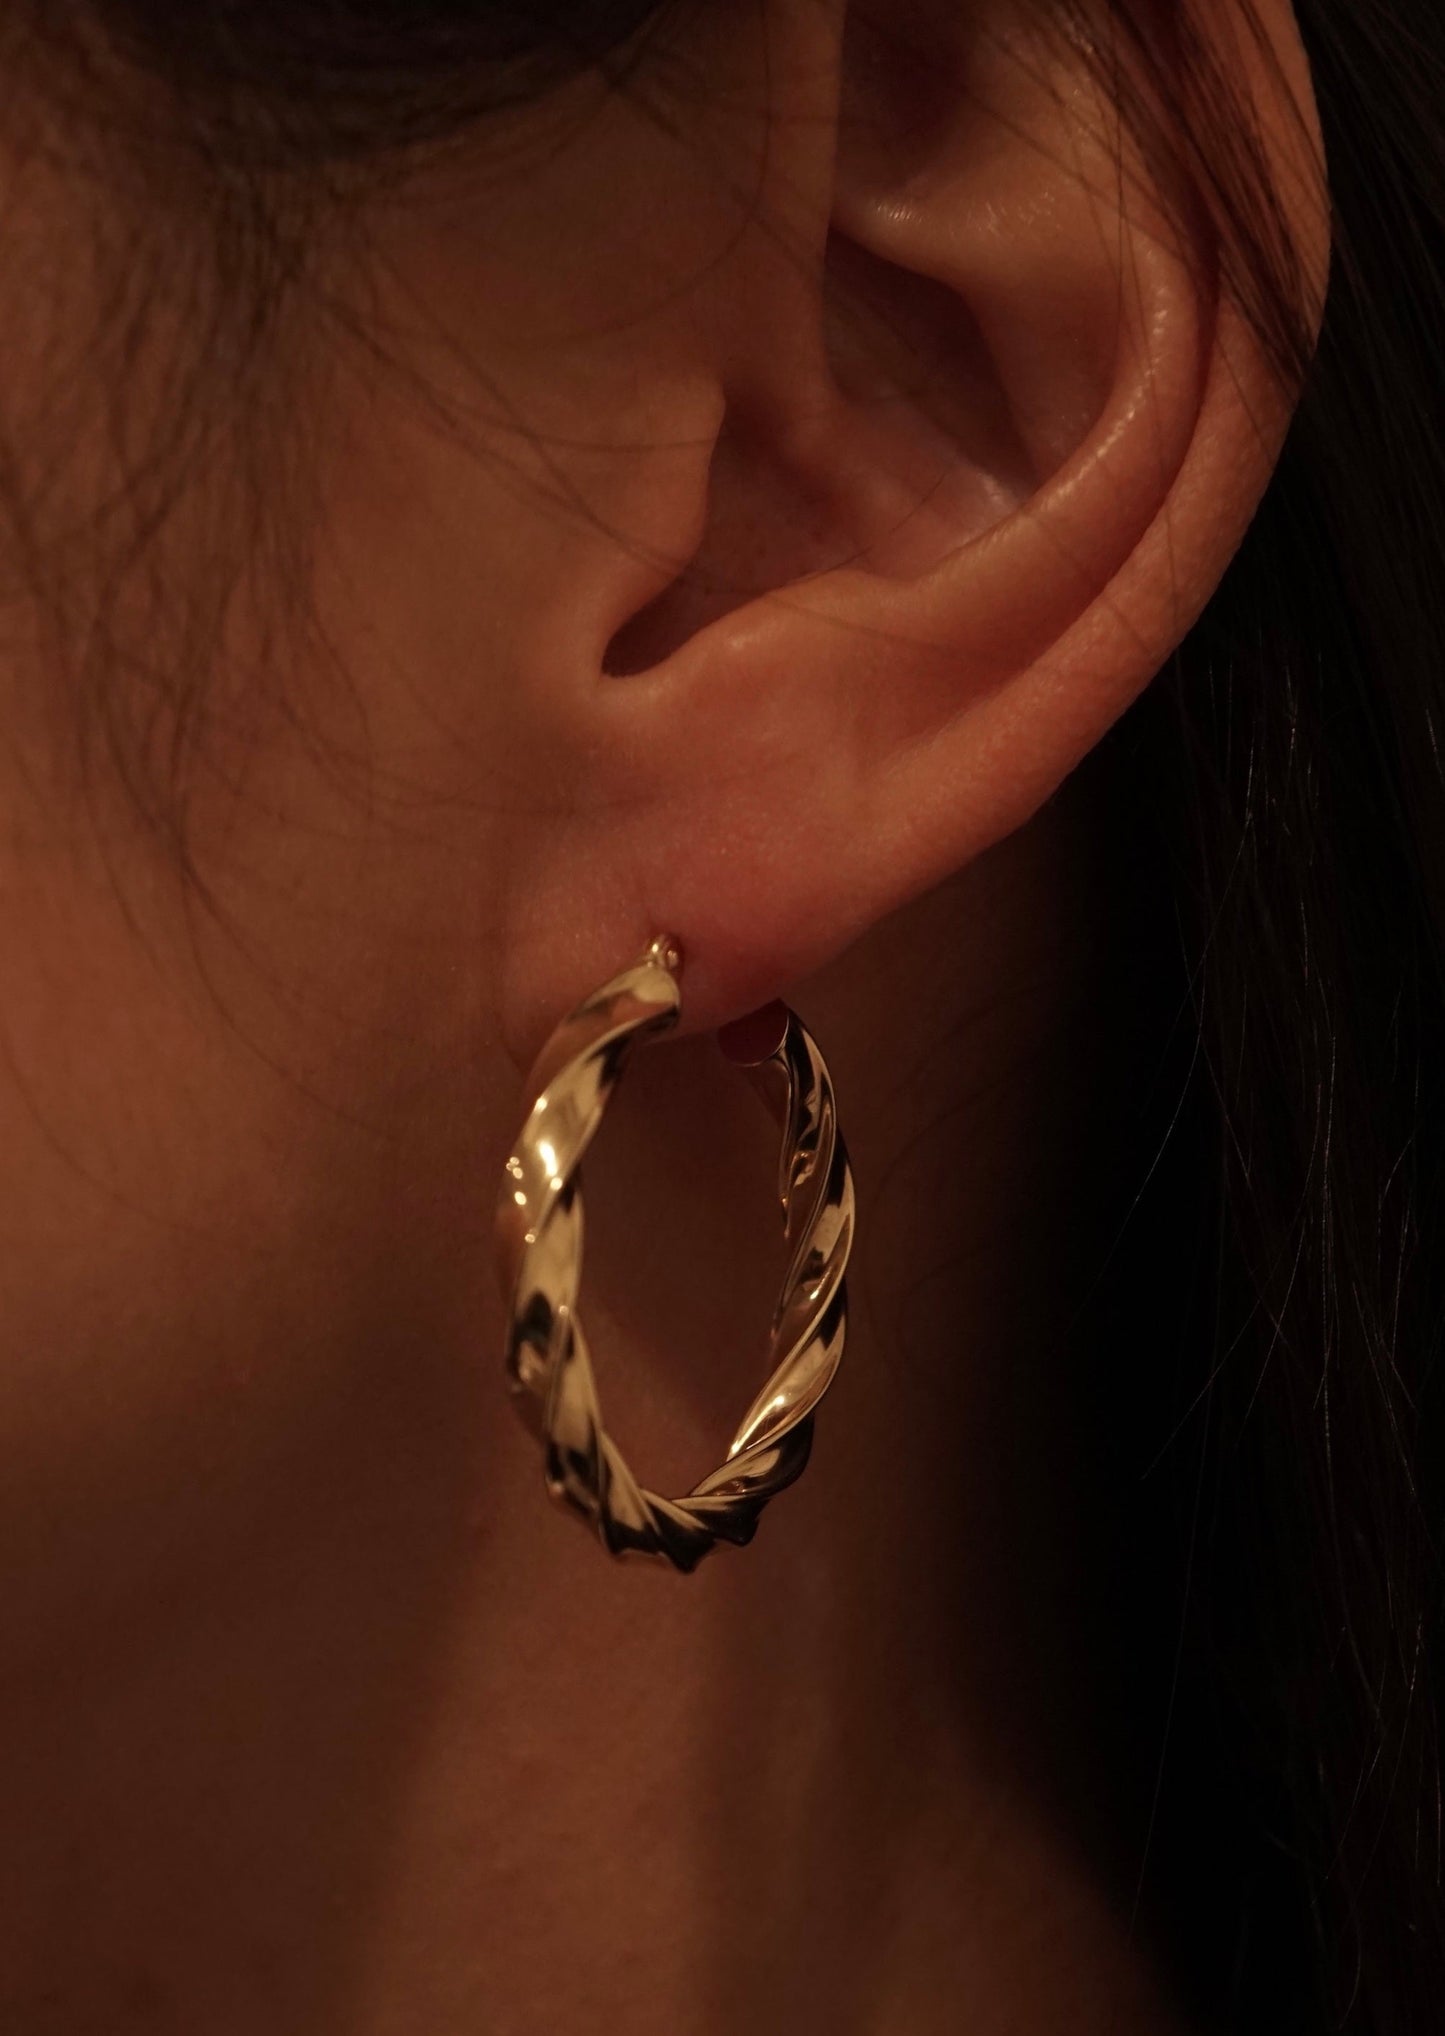 14k Gold Candy Hoops